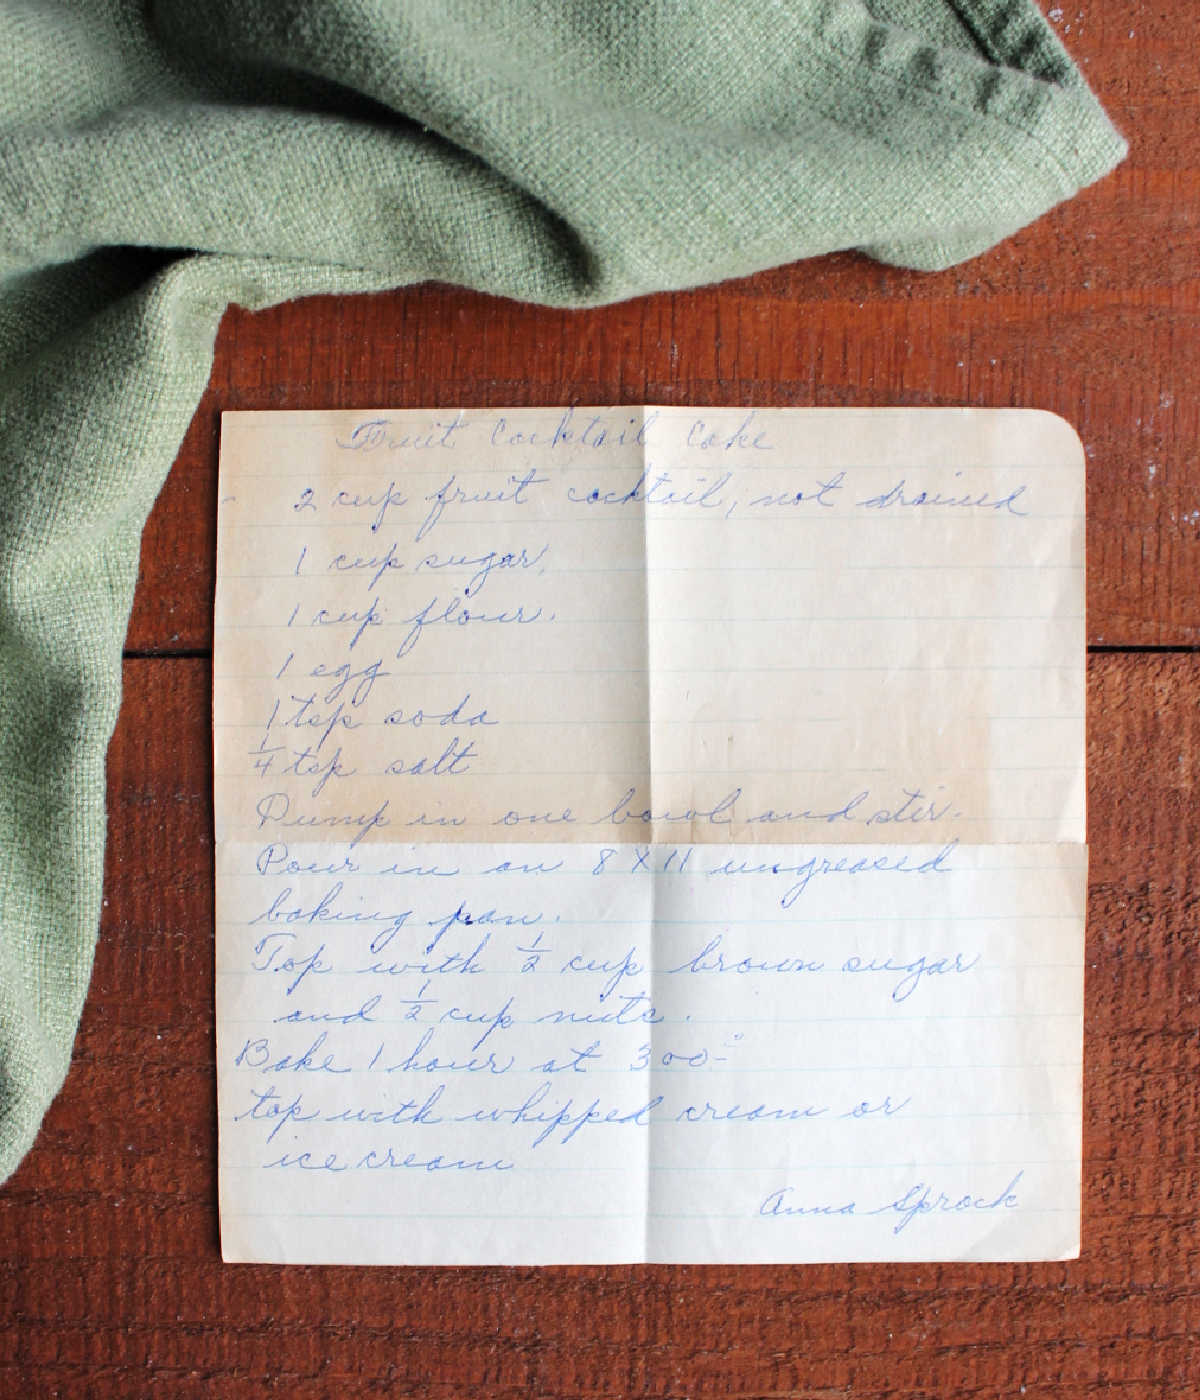 Hand written recipe for fruit cocktail cake on yellowed piece of paper.